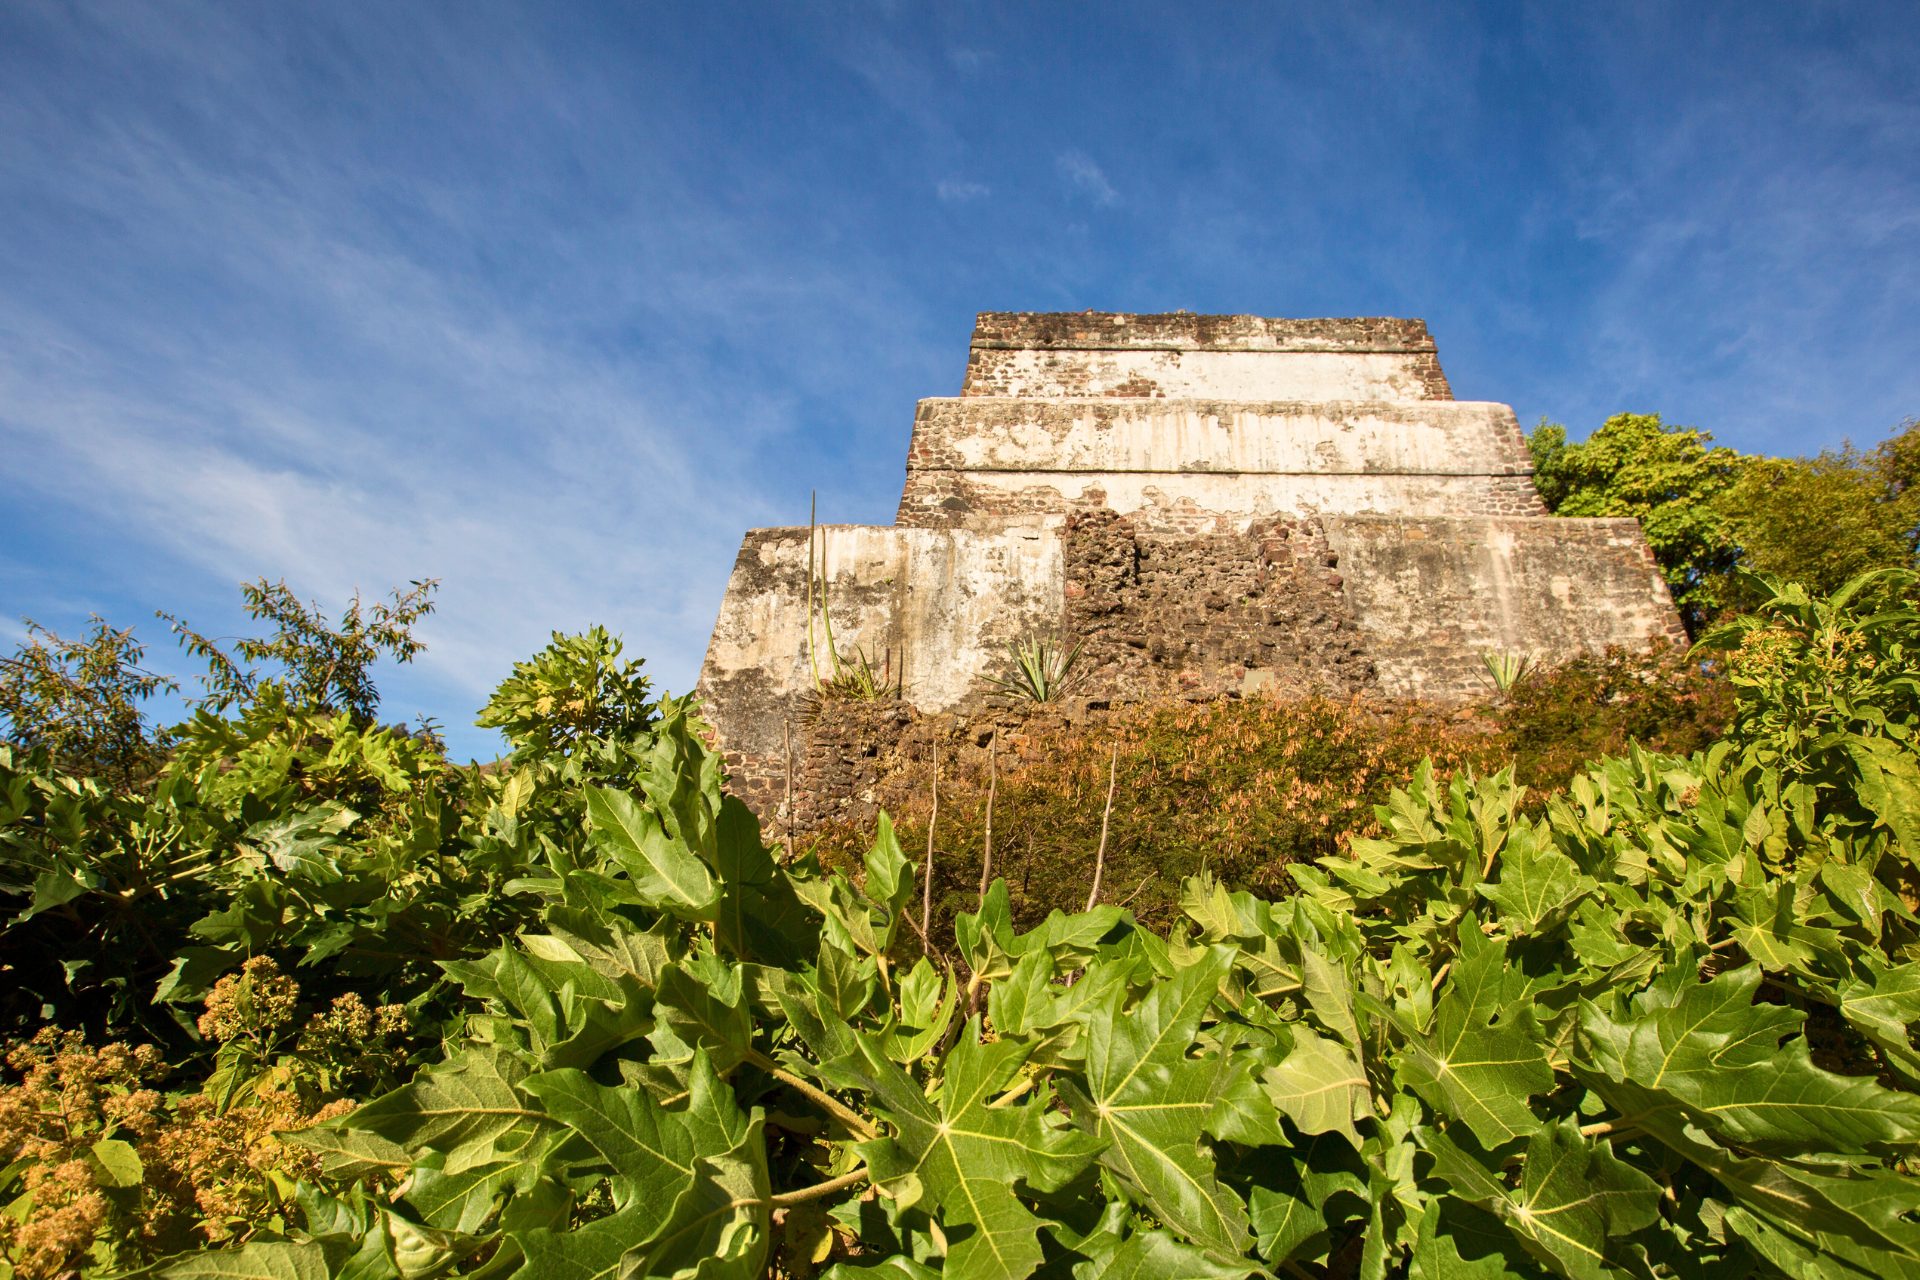 A photograph of the ancient Tepozteco pyramid amongst a lush, thick jungle.